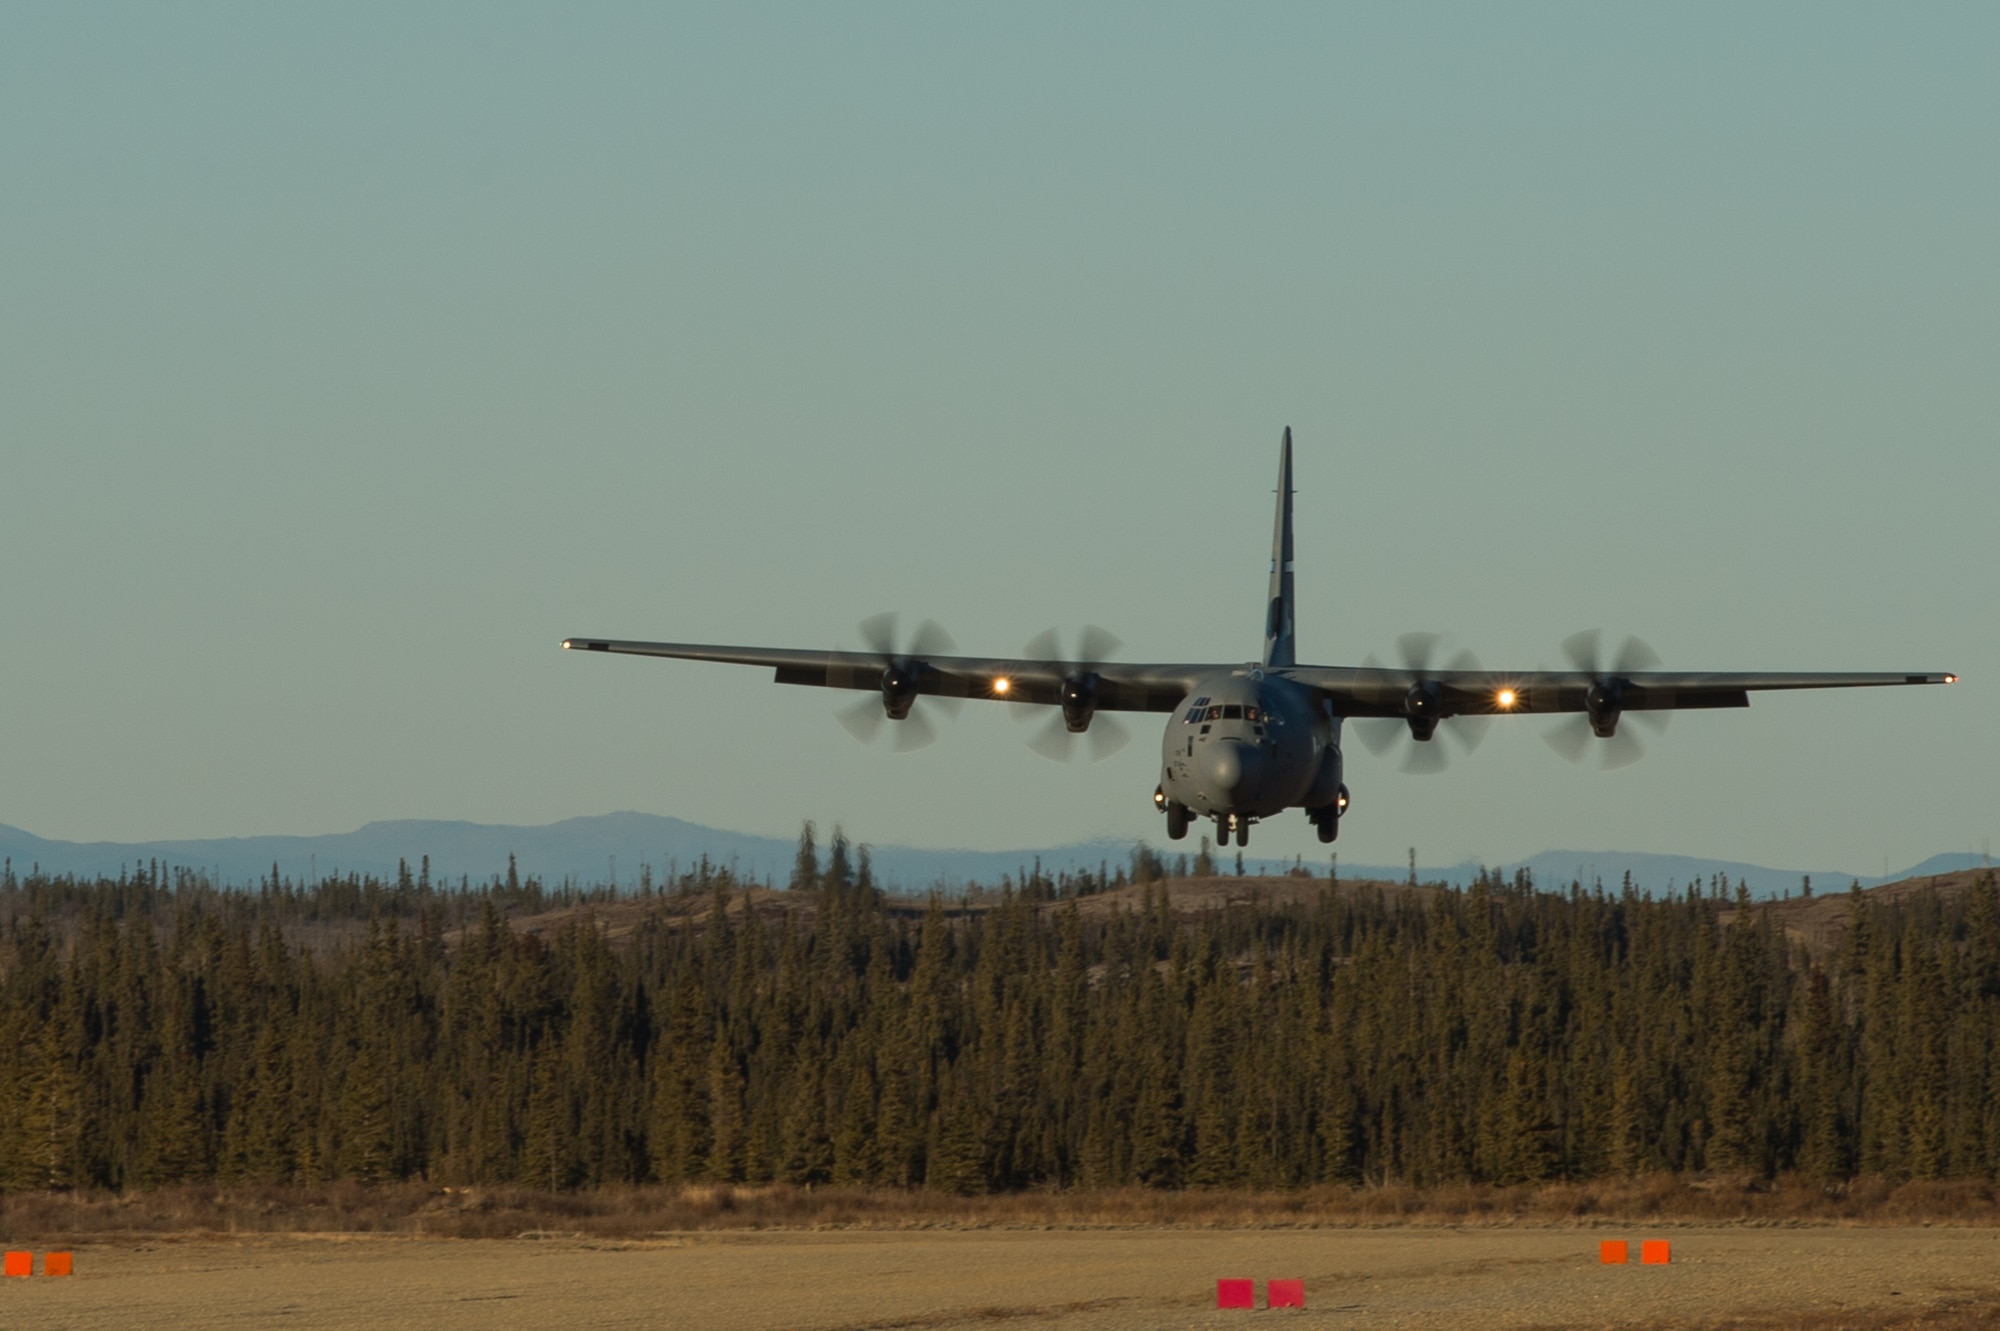 A U.S. Air Force C-130J Super Hercules from Dyess Air Force Base, Texas, lands at Donnelly Landing Zone, Alaska, during exercise RED FLAG-Alaska 17-1, Oct. 14, 2016. RF-A is a series of Pacific Air Forces commander-directed field training exercises for U.S. and partner nation forces, providing combined offensive counter-air, interdiction, close air support, and large force employment training in a simulated combat environment. (U.S. Air Force photo by Master Sgt. Joseph Swafford)
